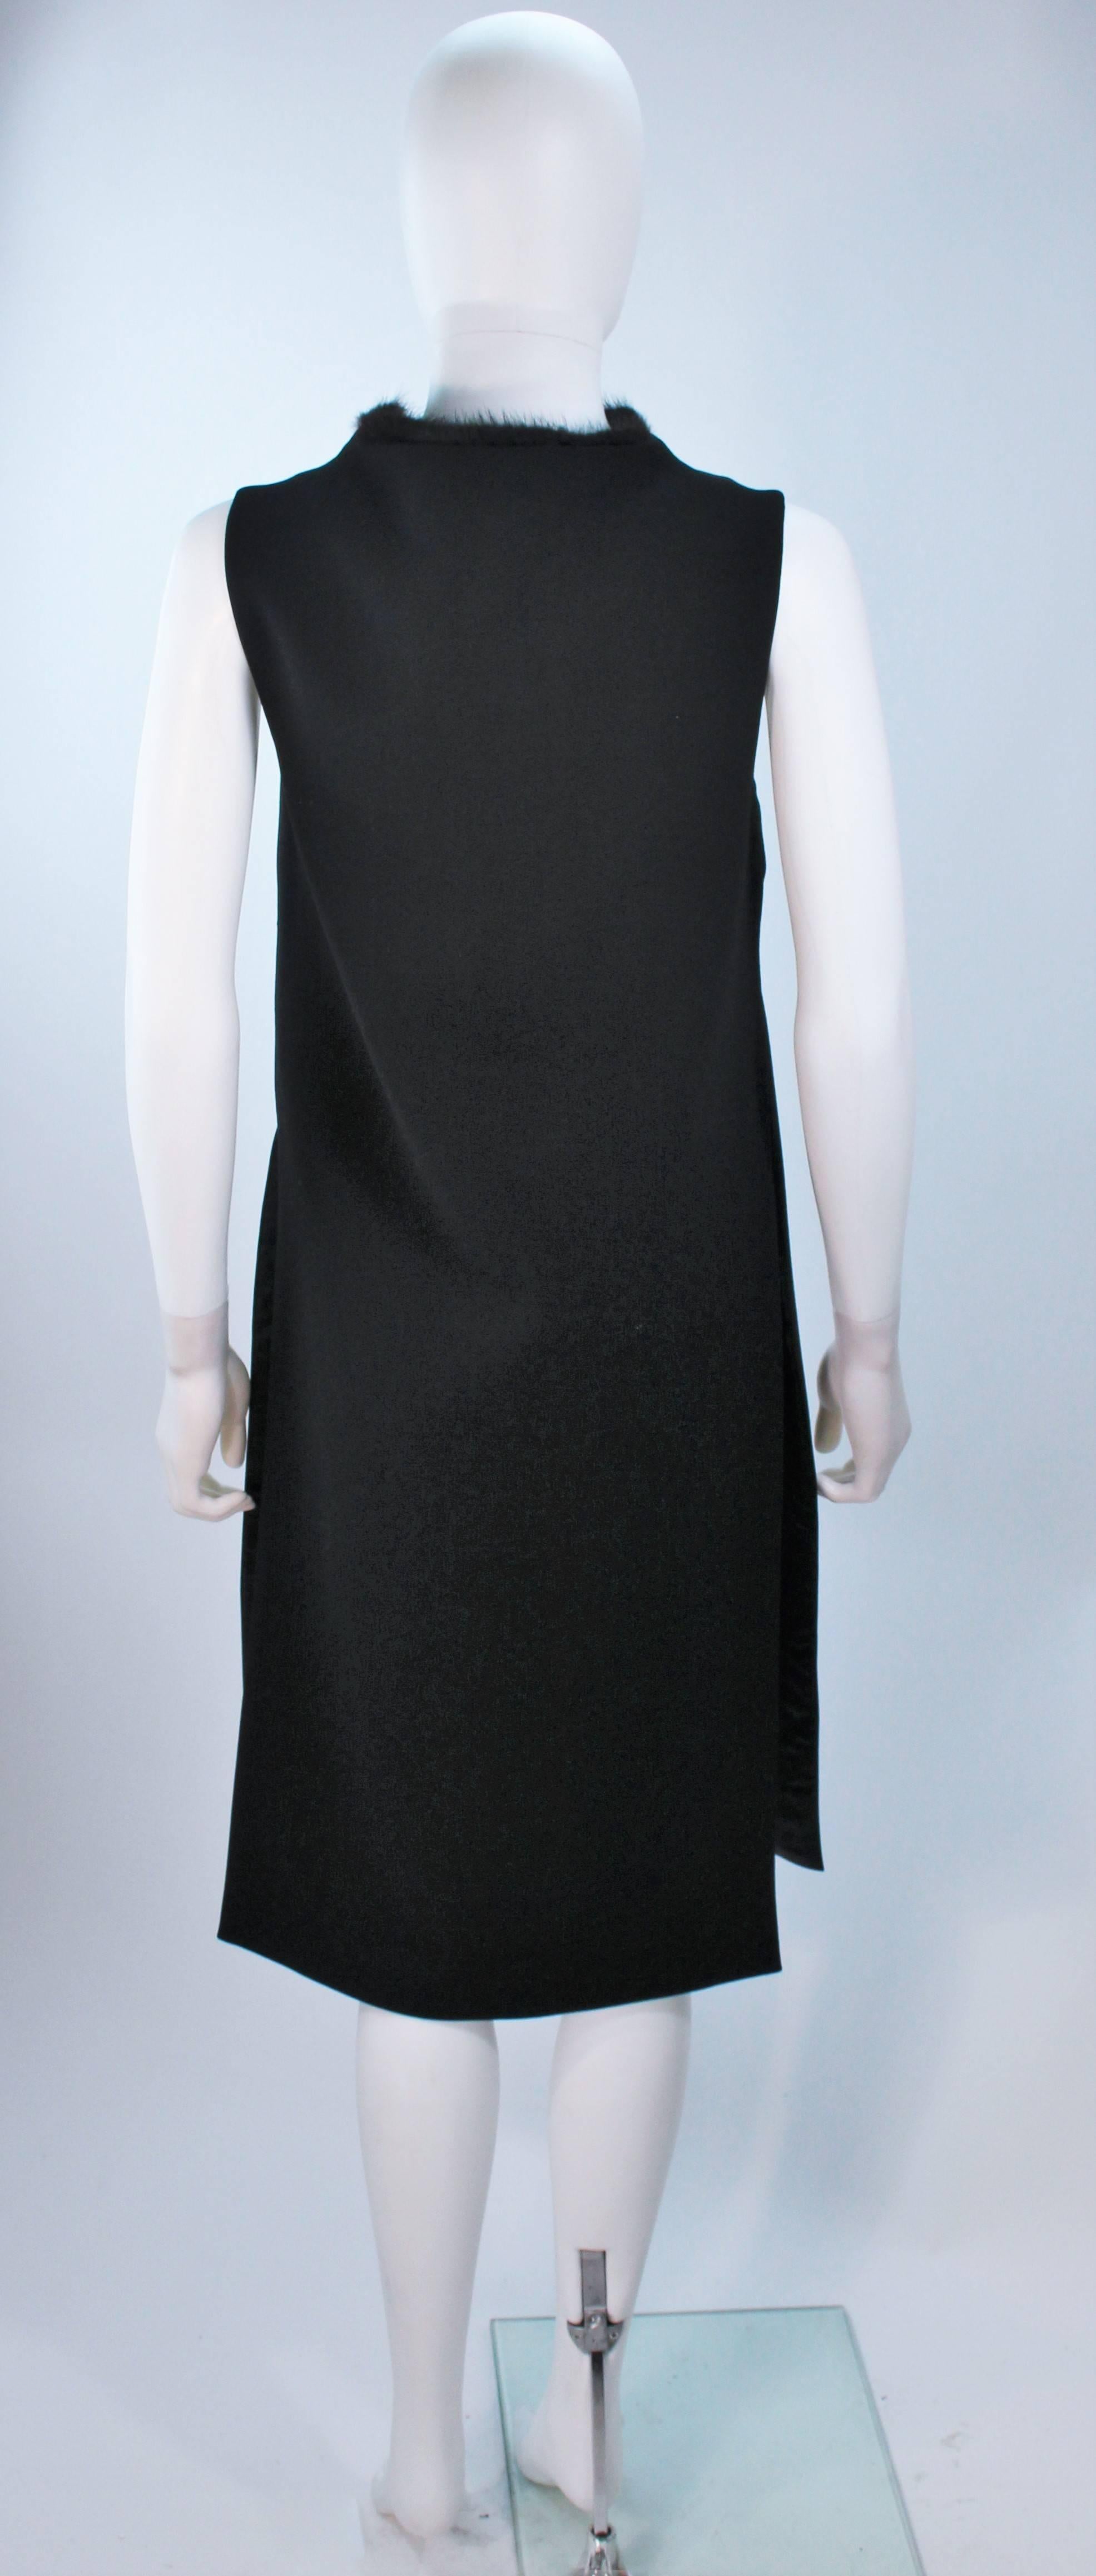 GIANNI VERSACE Black Wool Tunic Dress with Mink Collar and Open Sides Size 4-6 4